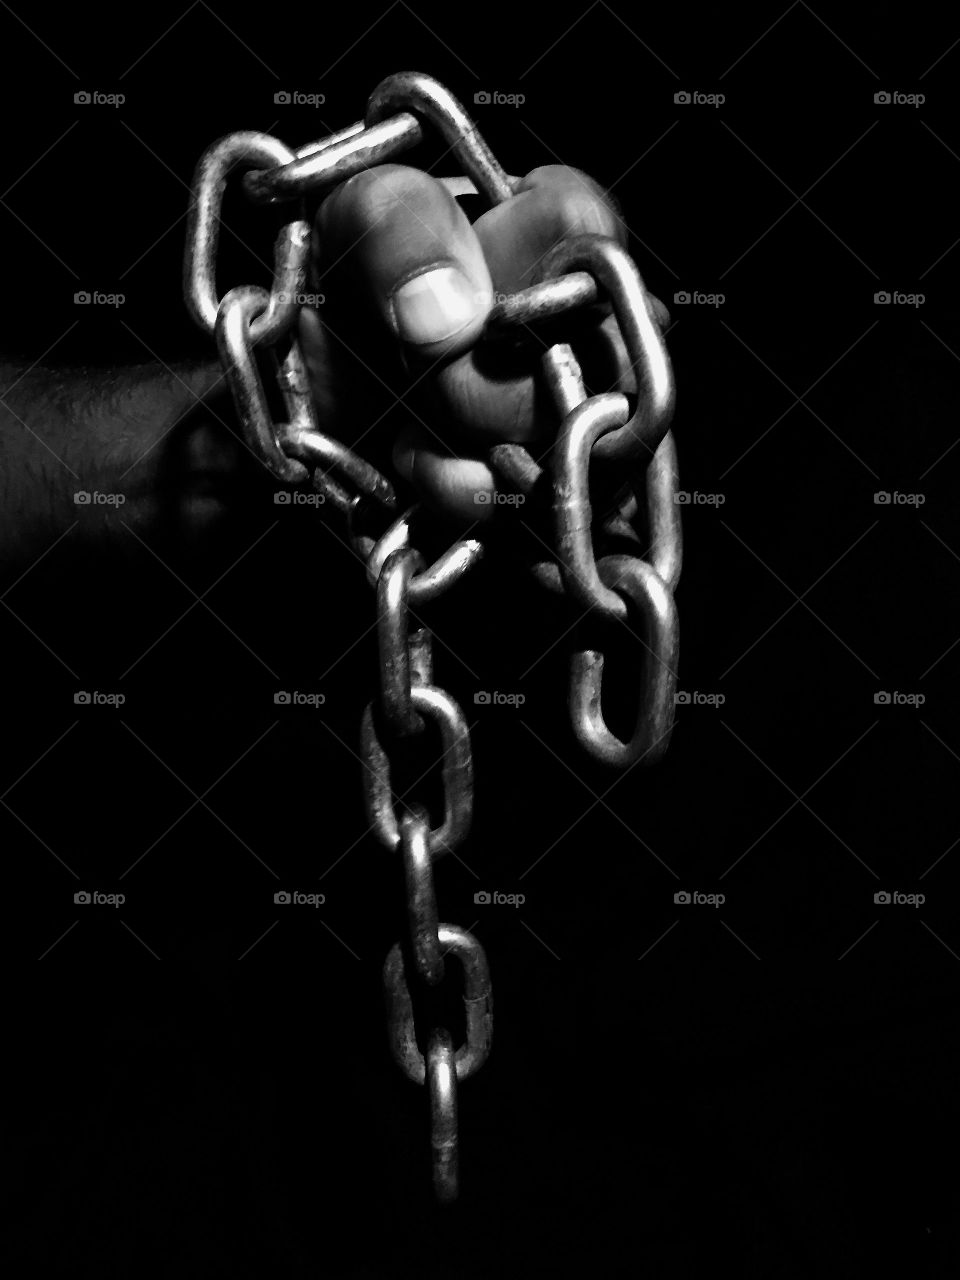 Studio shot of a person holding chain